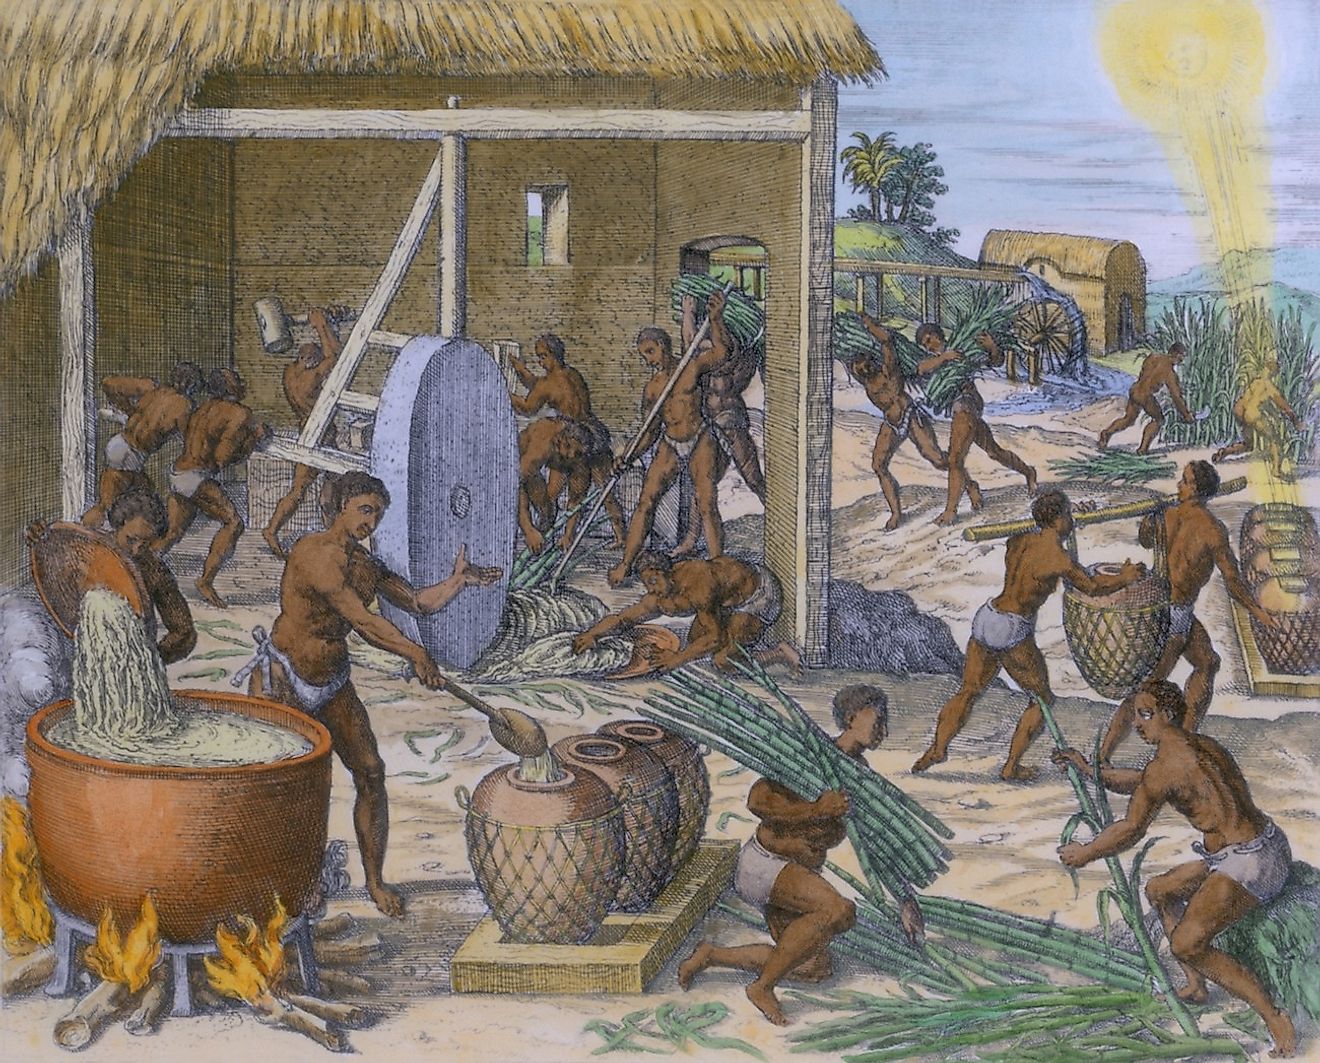 African slaves processing sugar cane on the Caribbean island of Hispaniola, 1595 engraving by Theodor de Bry with modern watercolor.